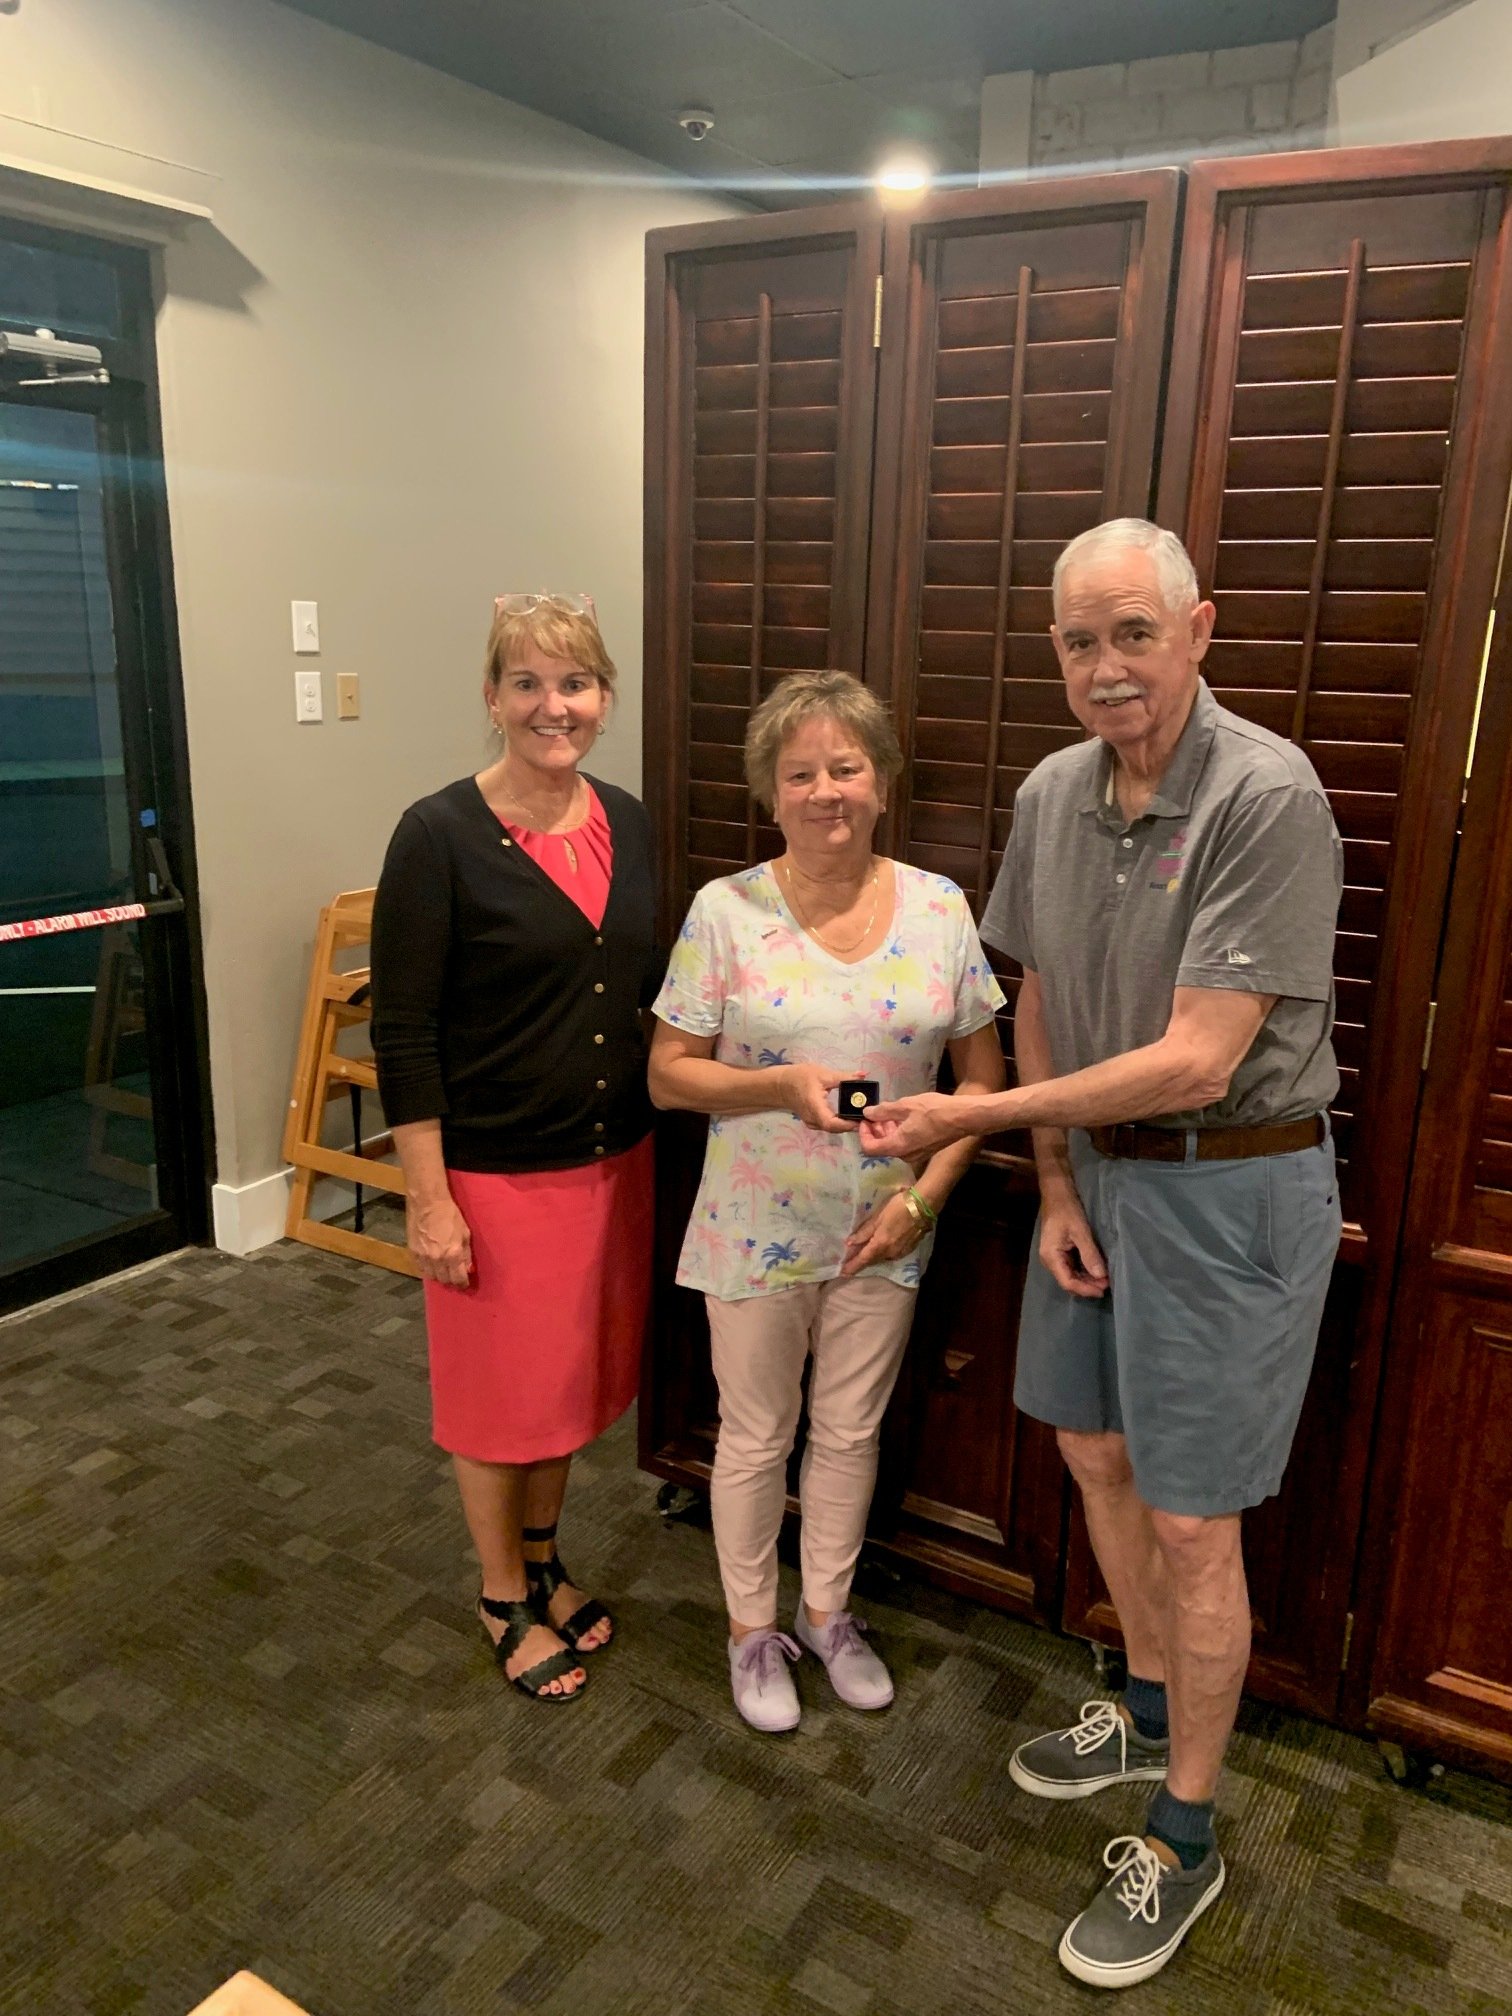  The Club recently honored past president Margaret Mudron with another Paul Harris tier for dedication and hard work during her year as president.   